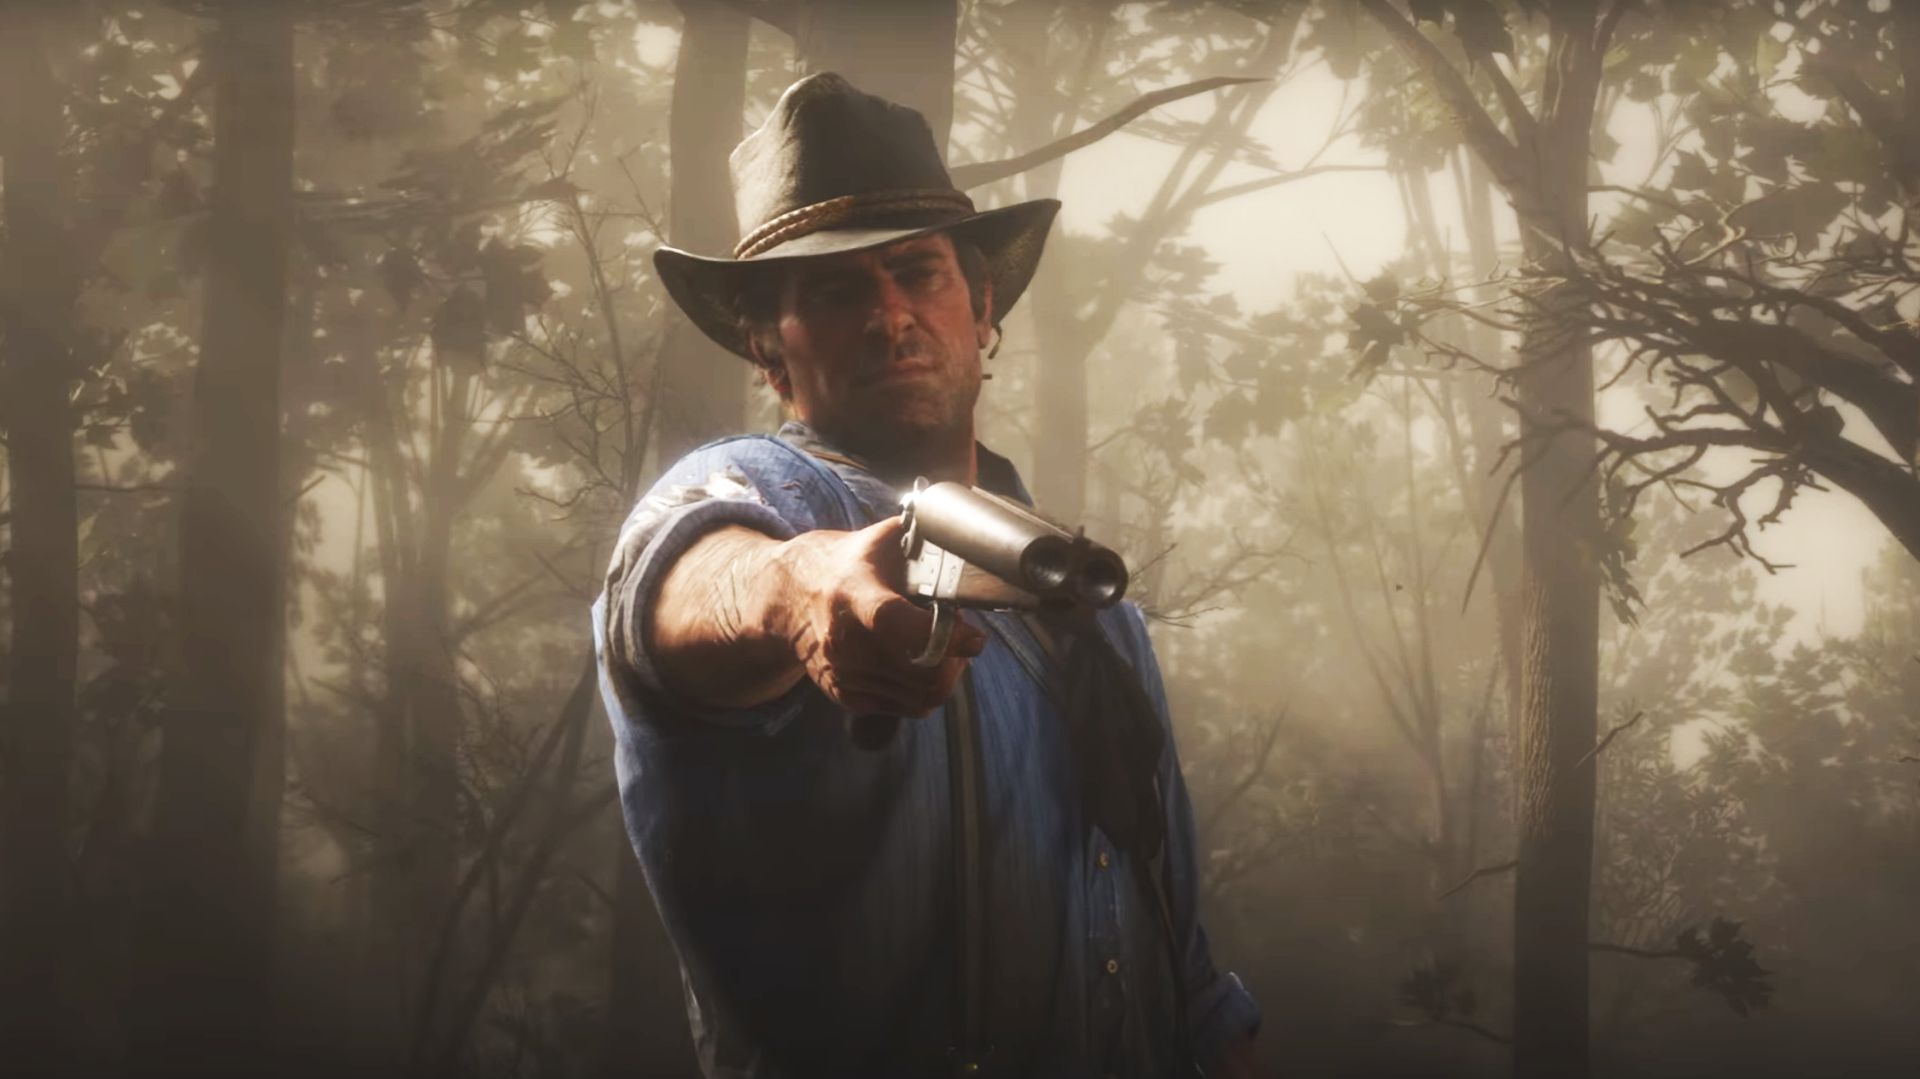 This Red Dead Redemption 2 mod adds brutal GTA 4-like deaths